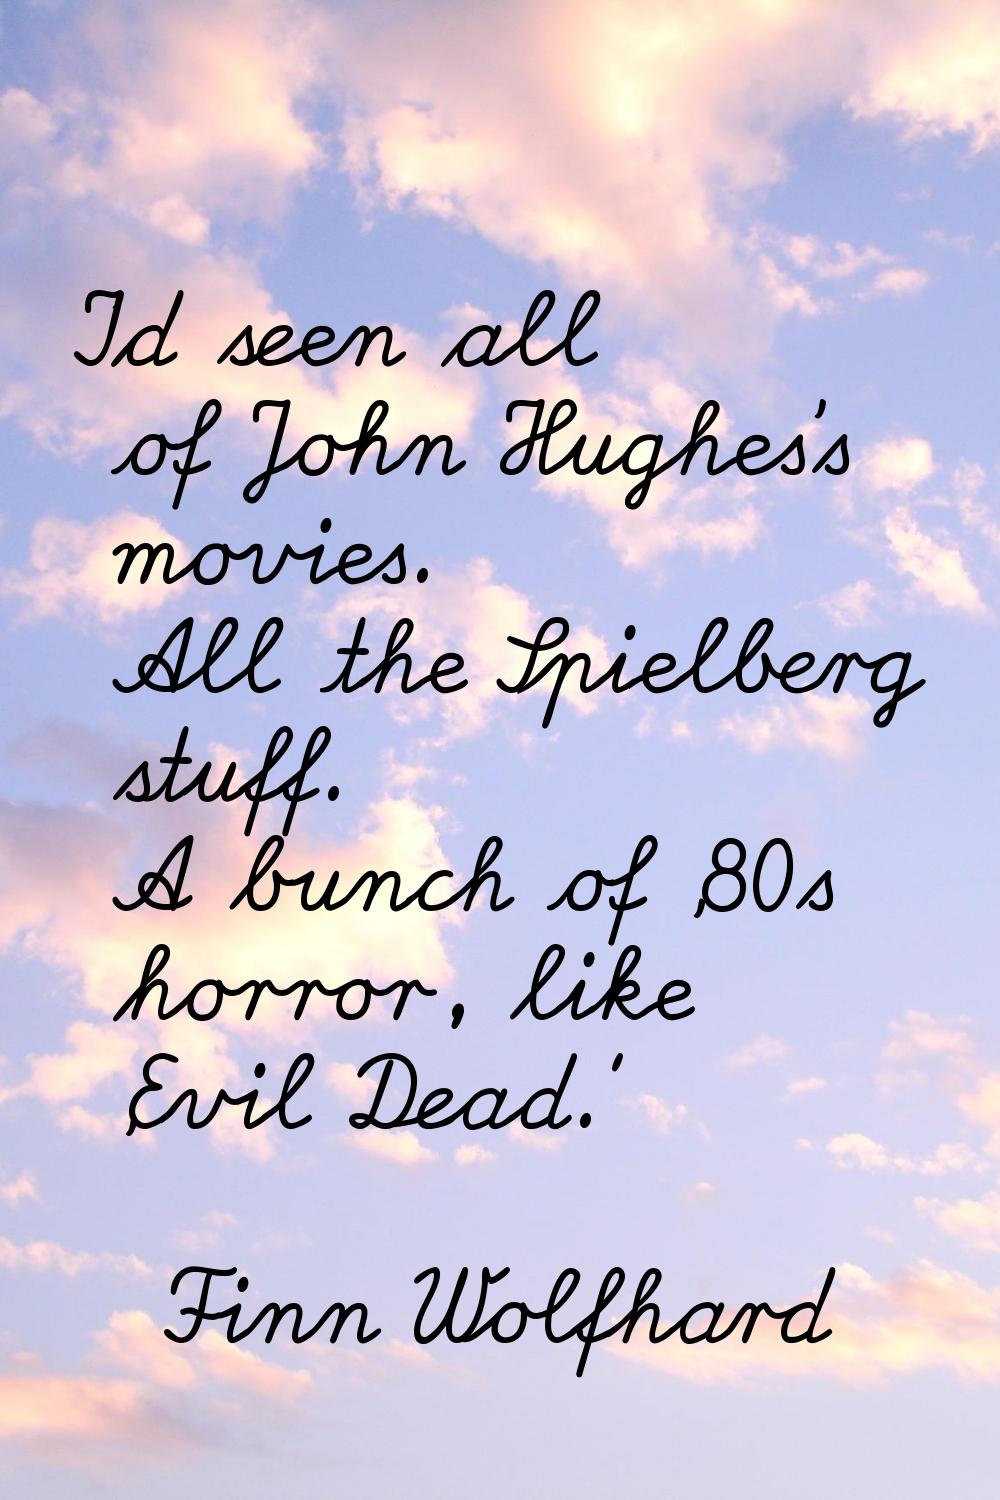 I'd seen all of John Hughes's movies. All the Spielberg stuff. A bunch of '80s horror, like 'Evil D